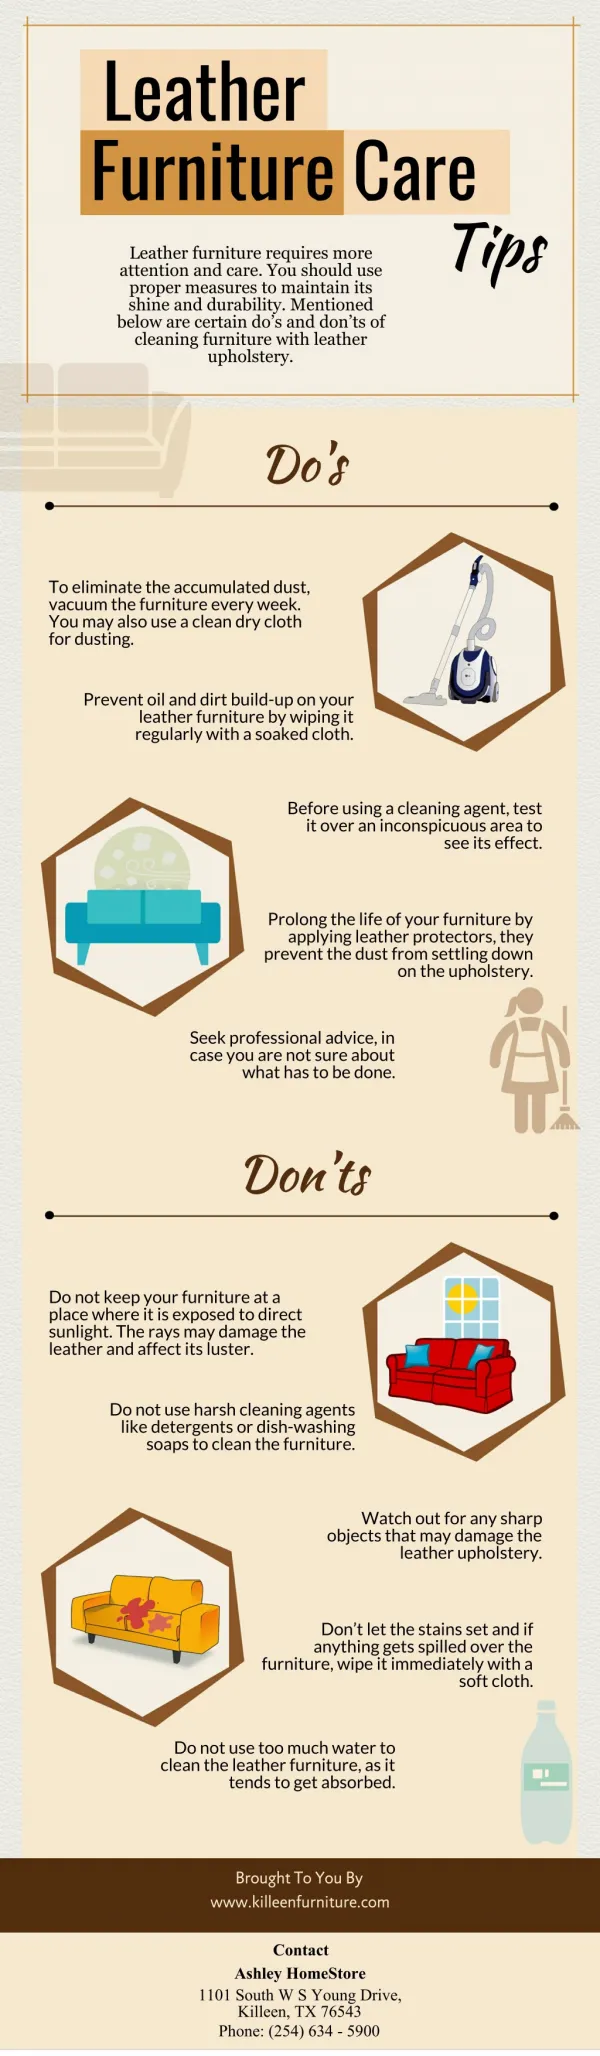 Leather Furniture Care Tips